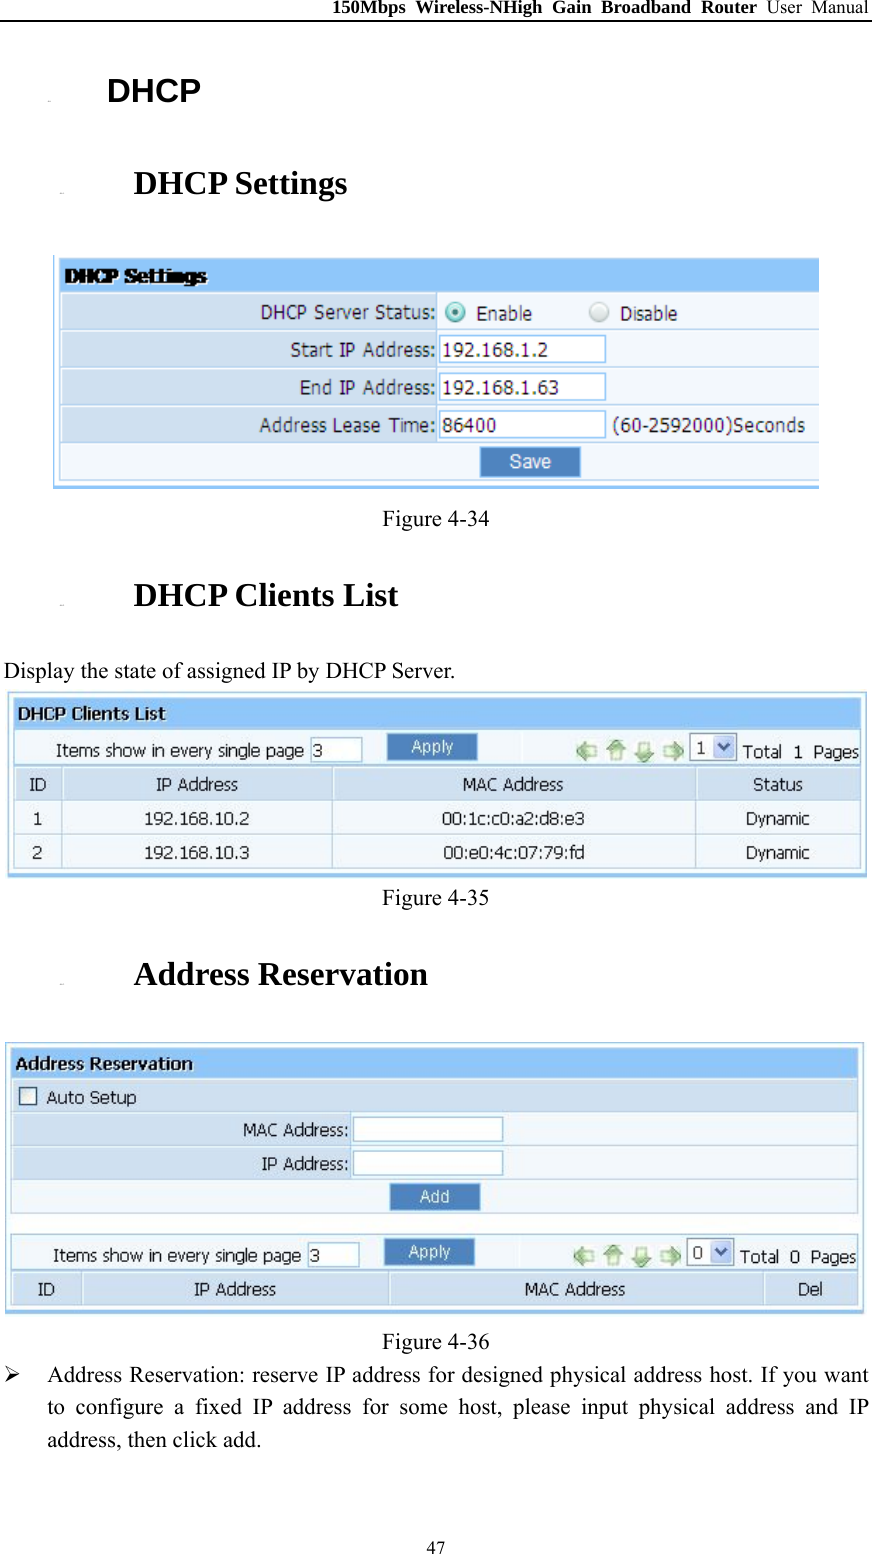 150Mbps Wireless-NHigh Gain Broadband Router User Manual 4.6. DHCP 4.6.1. DHCP Settings  Figure 4-34 4.6.2. DHCP Clients List Display the state of assigned IP by DHCP Server.  Figure 4-35 4.6.3. Address Reservation  Figure 4-36  Address Reservation: reserve IP address for designed physical address host. If you want to configure a fixed IP address for some host, please input physical address and IP address, then click add.  47